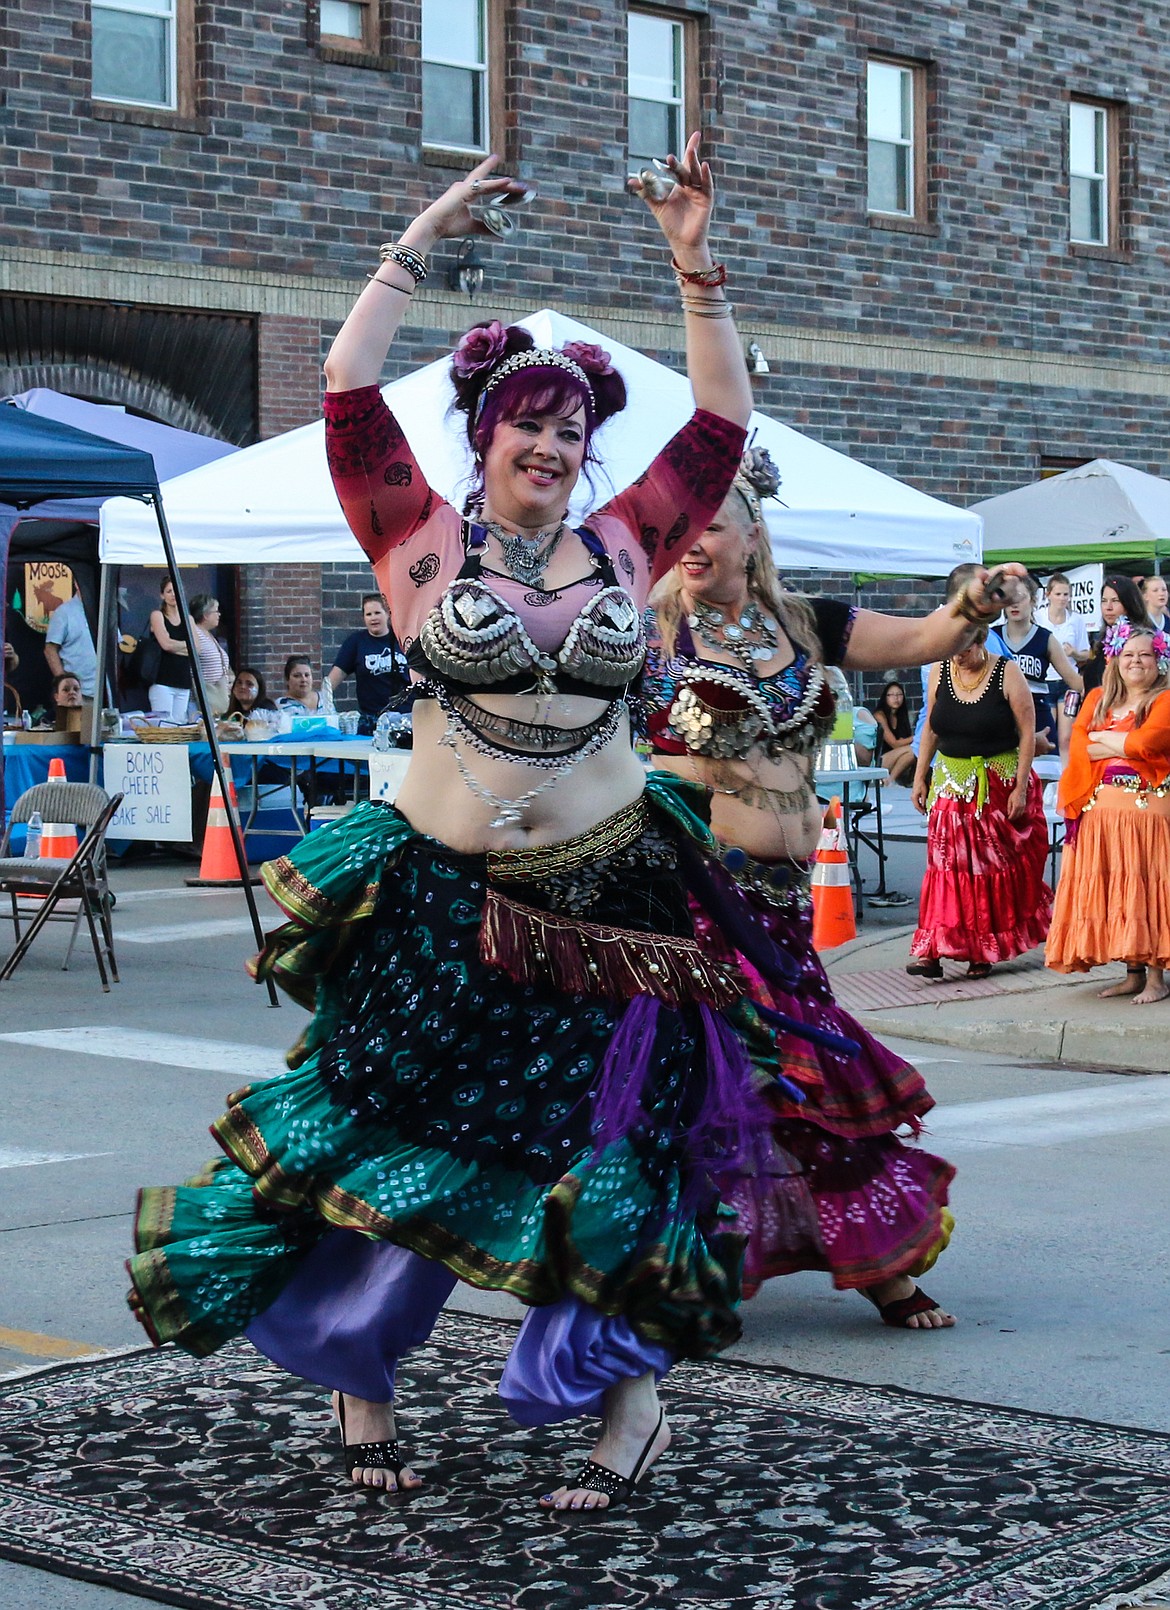 Photo by MANDI BATEMAN
Belly Dancers delighted the crowd at the 2019 Kootenai River Days.